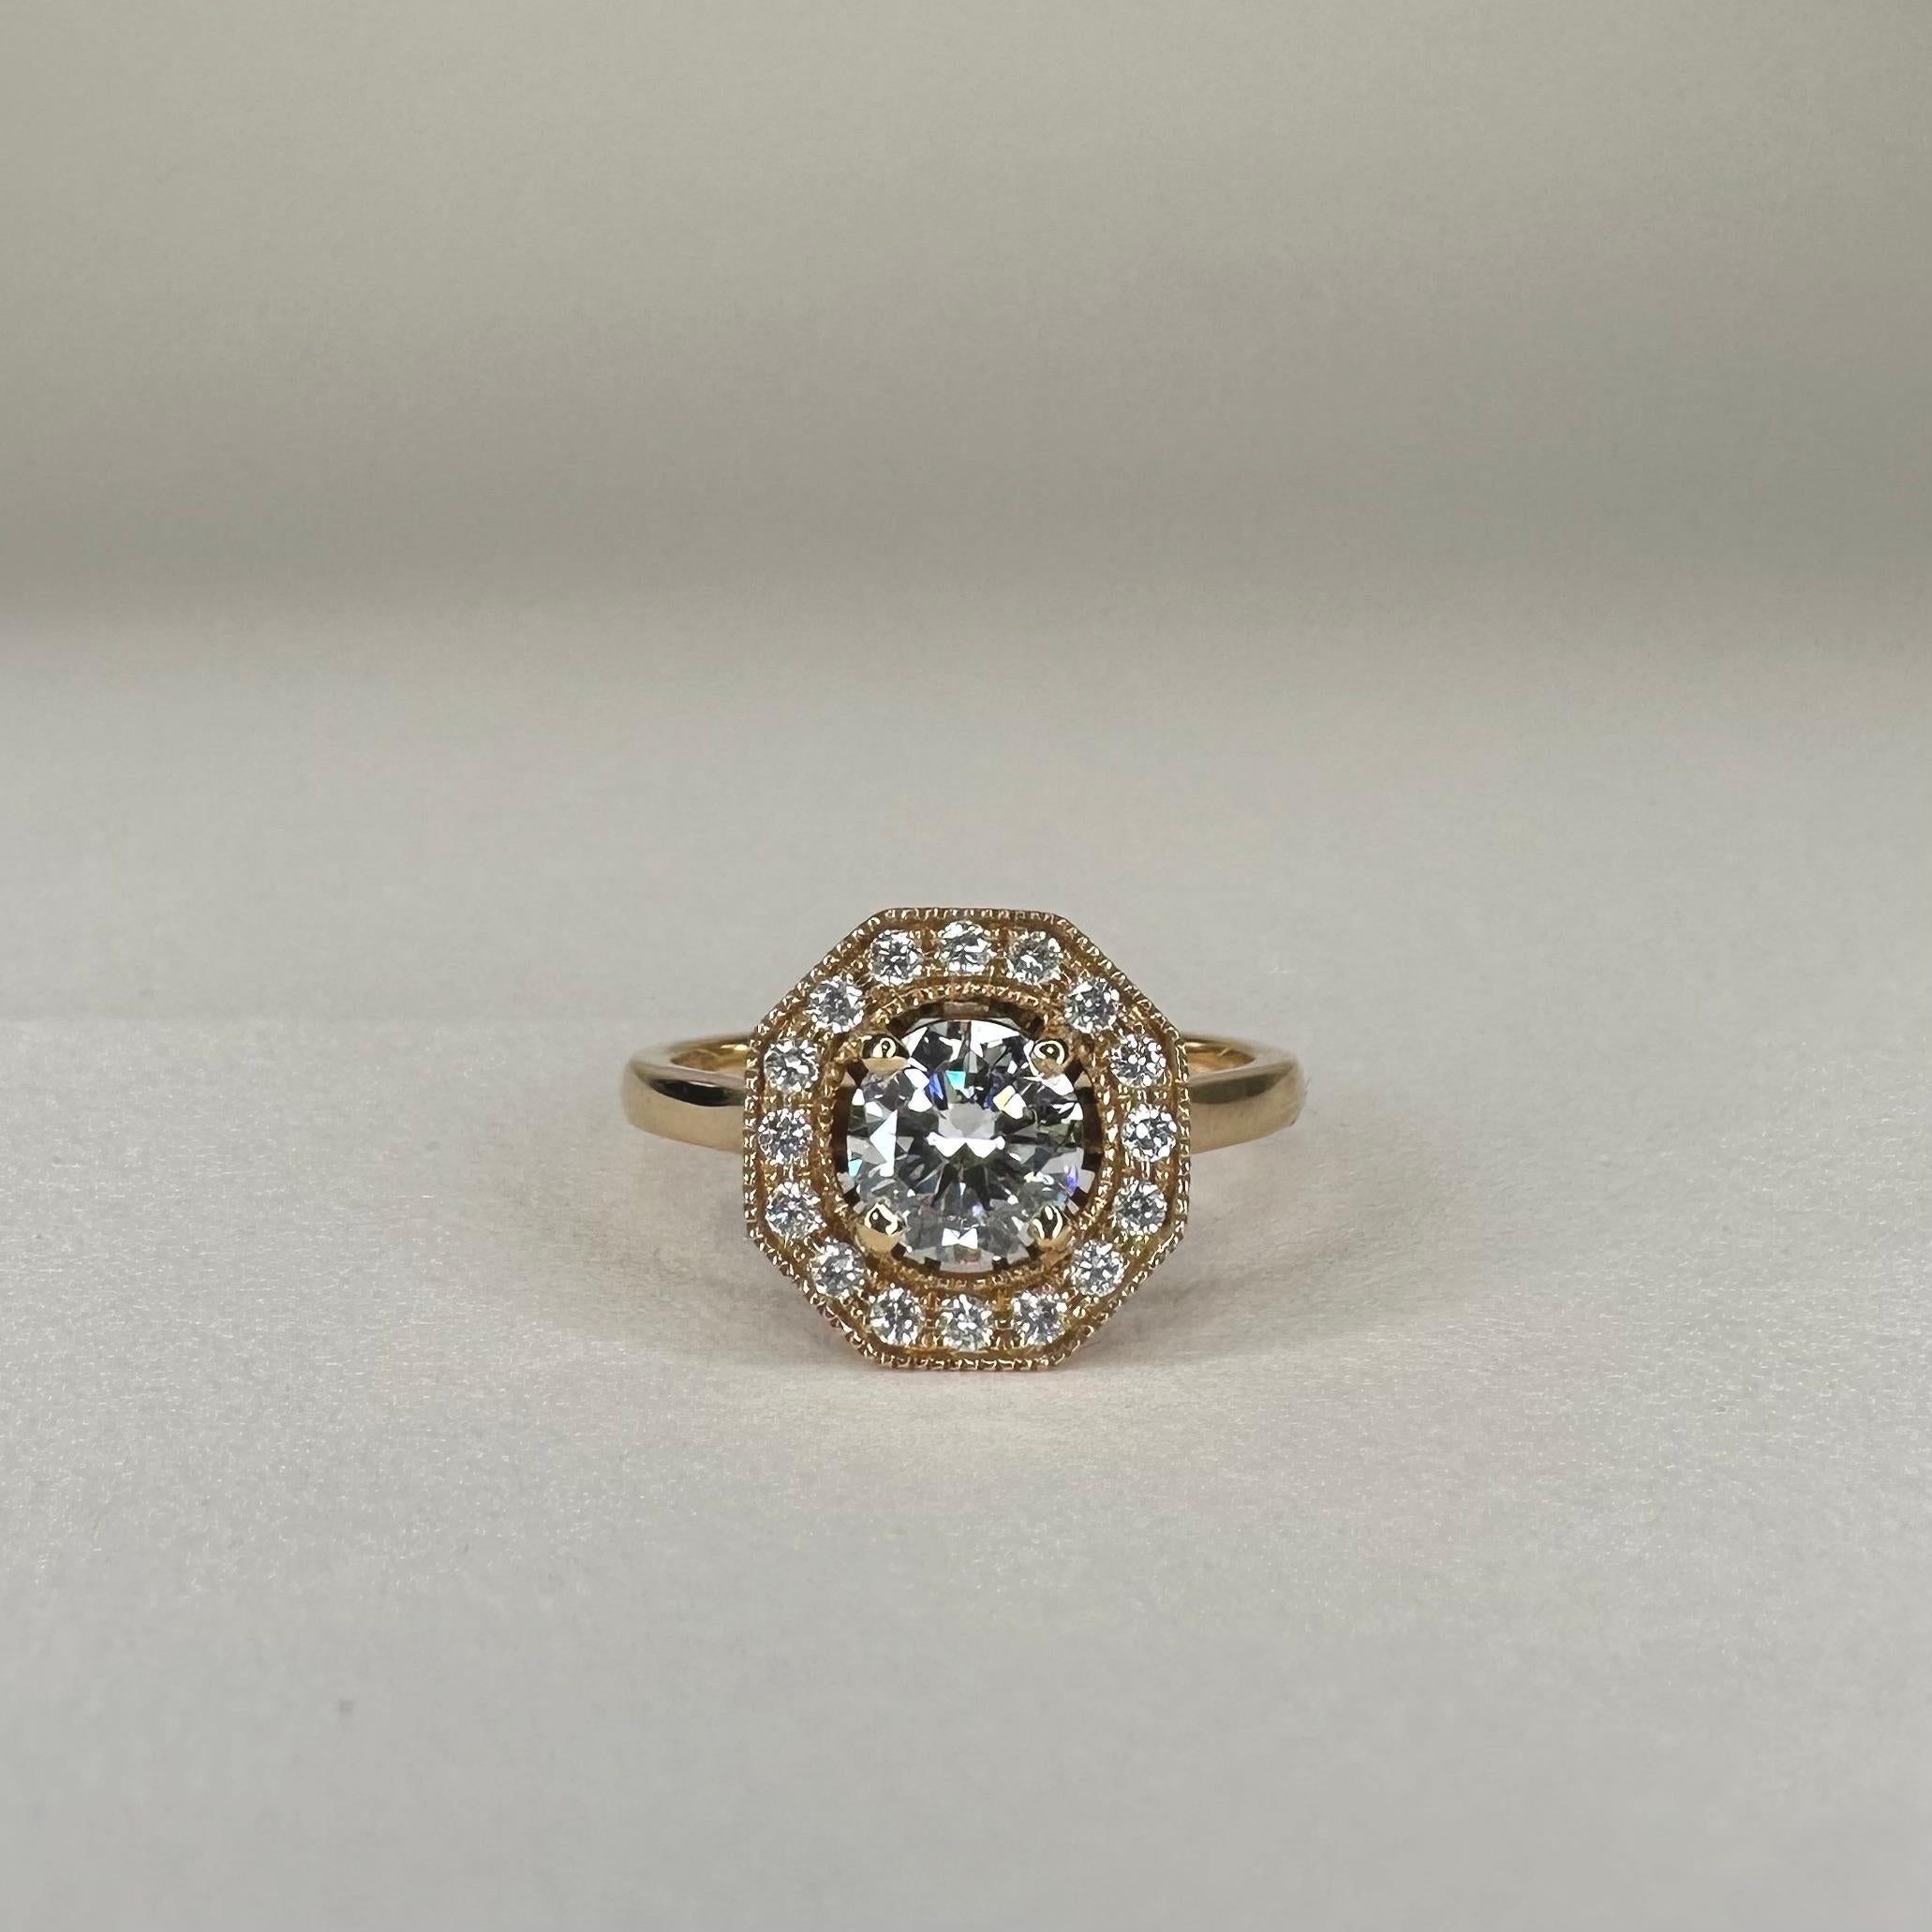 For Sale:  18k Yellow Gold Art Deco Style Ring 0.7 Ct Brilliant Cut Diamond and 0.15 Cts 4